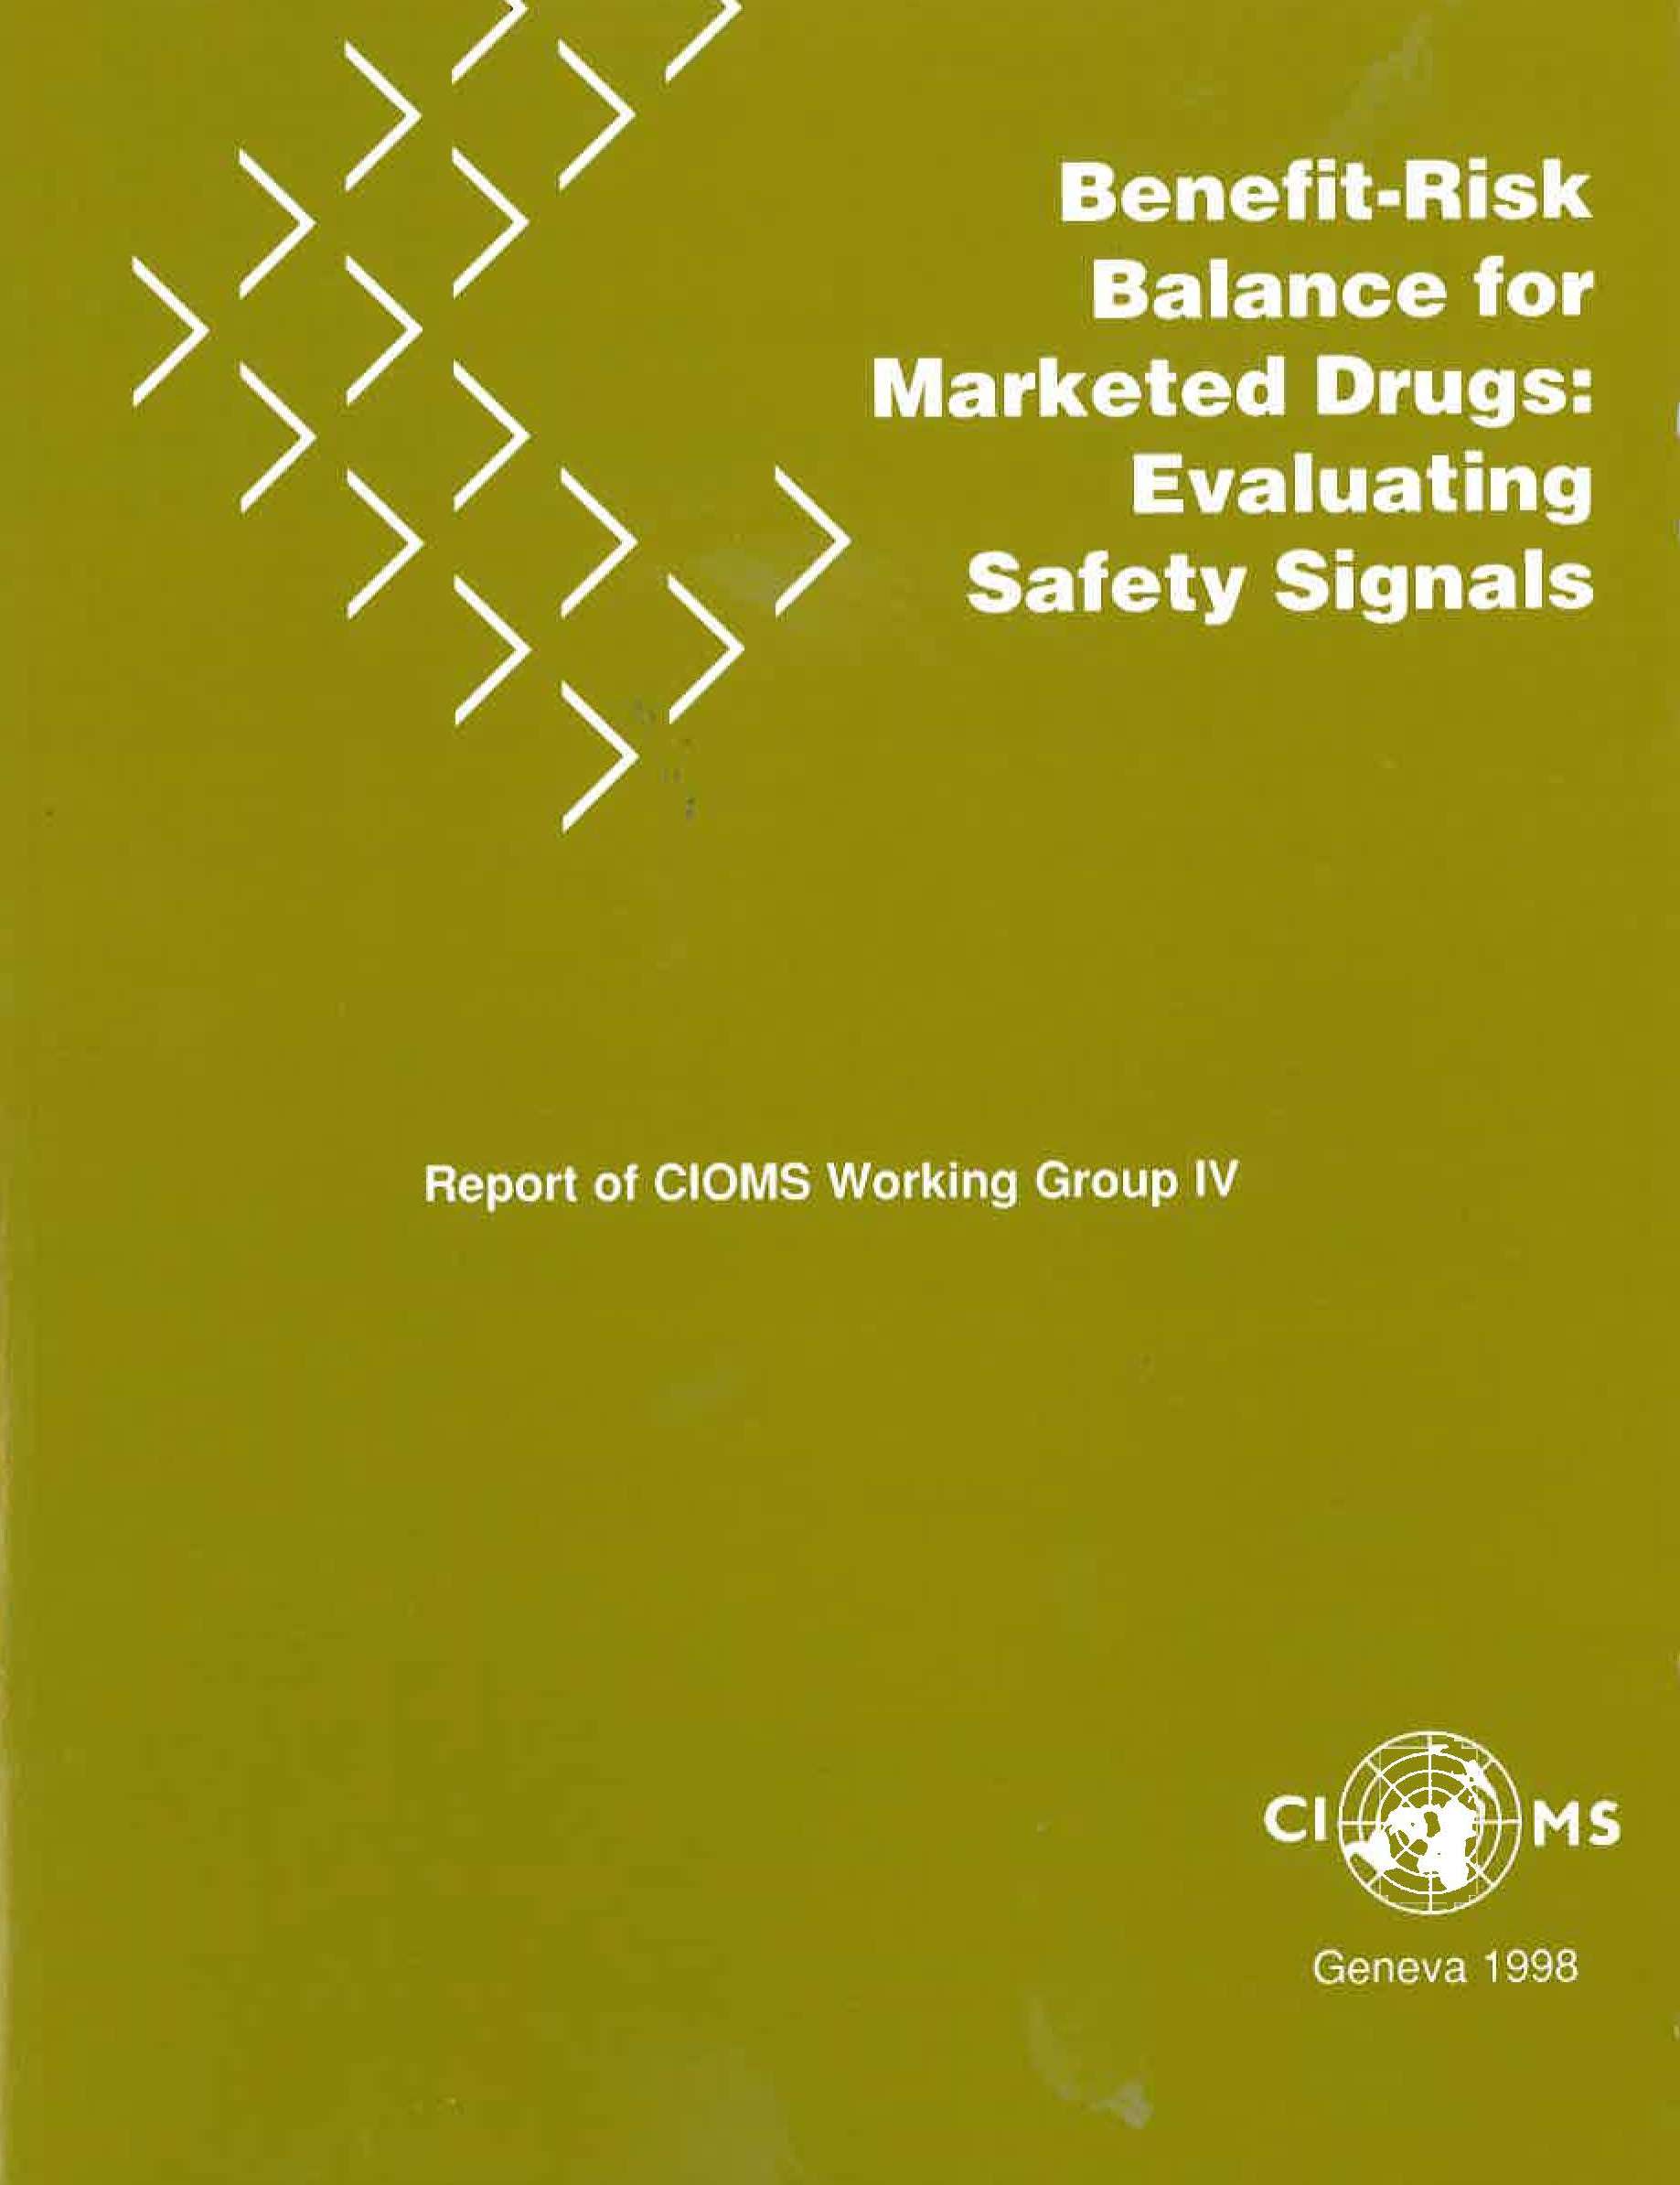 Benefit-Risk Balance for Marketed Drugs: Evaluating Safety Signals